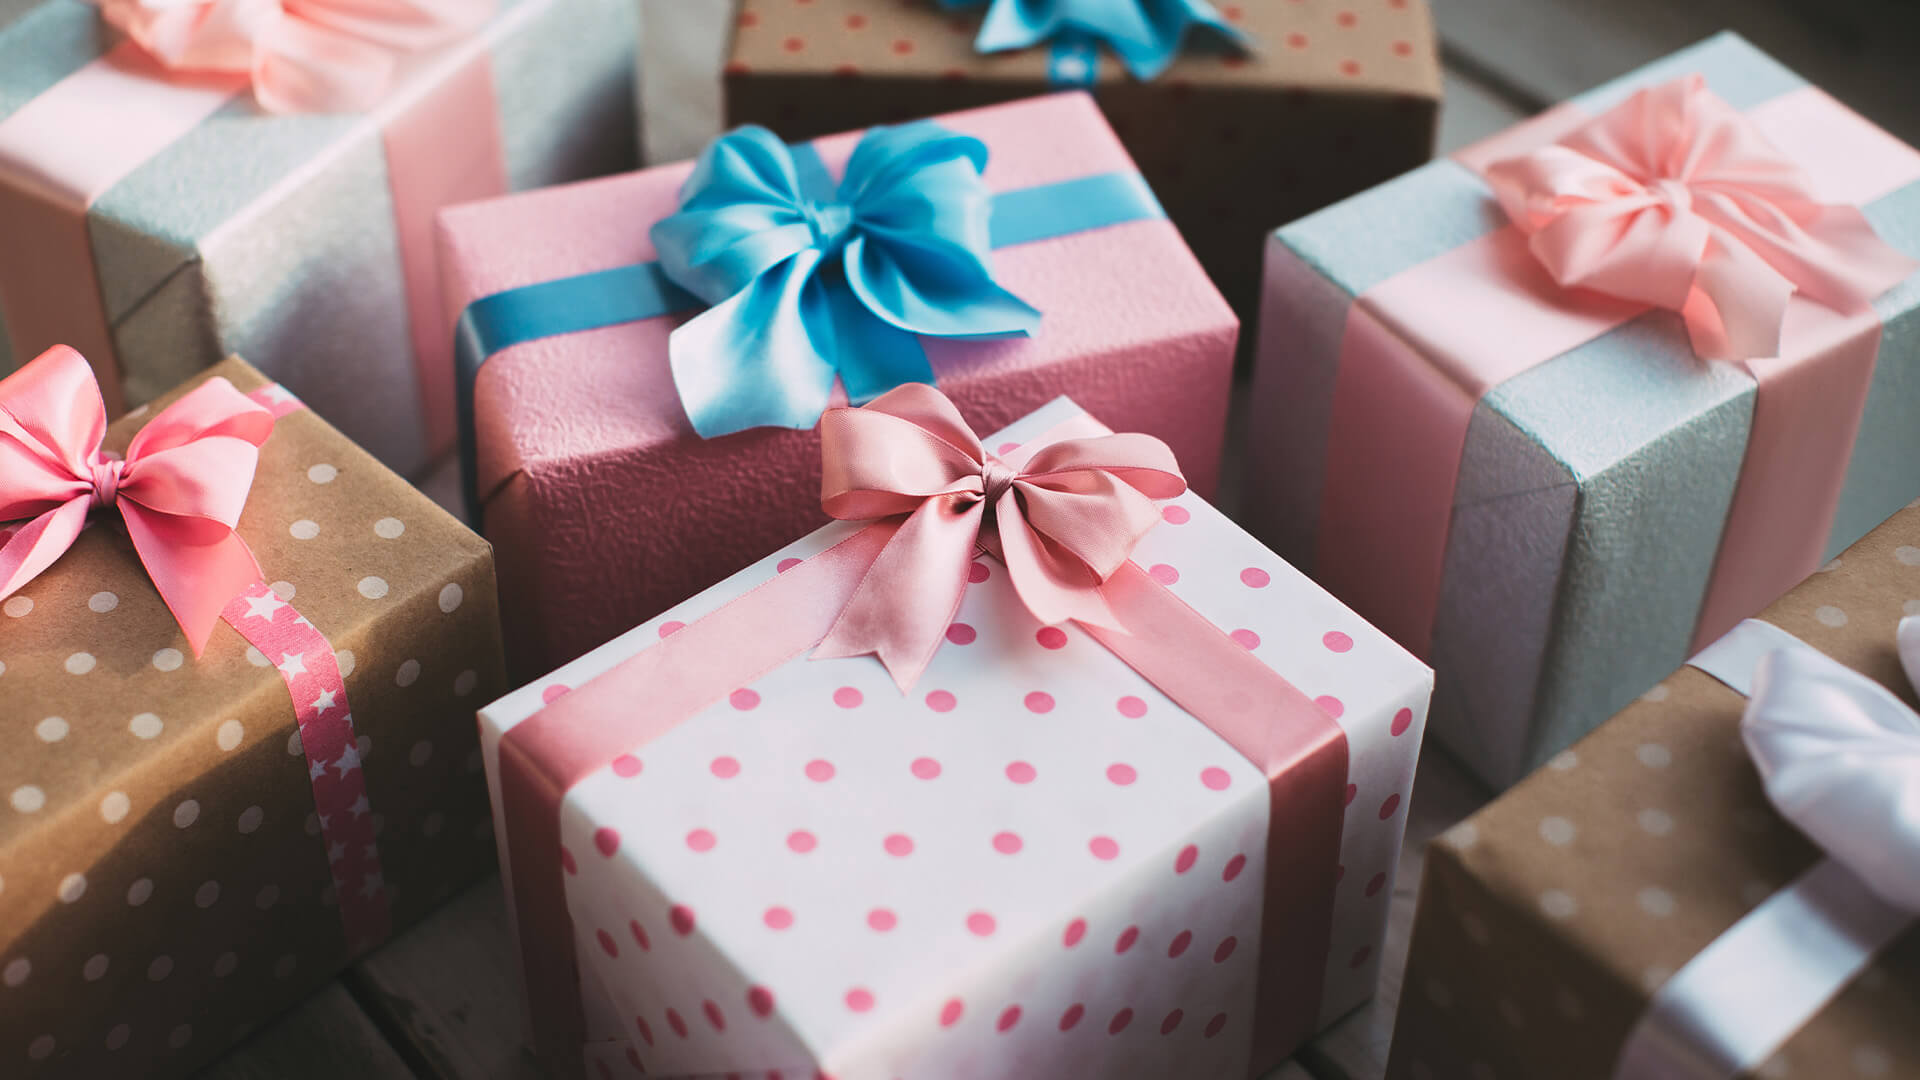 Neatly wrapped boxes with pink and blue gift wrap and ribbons